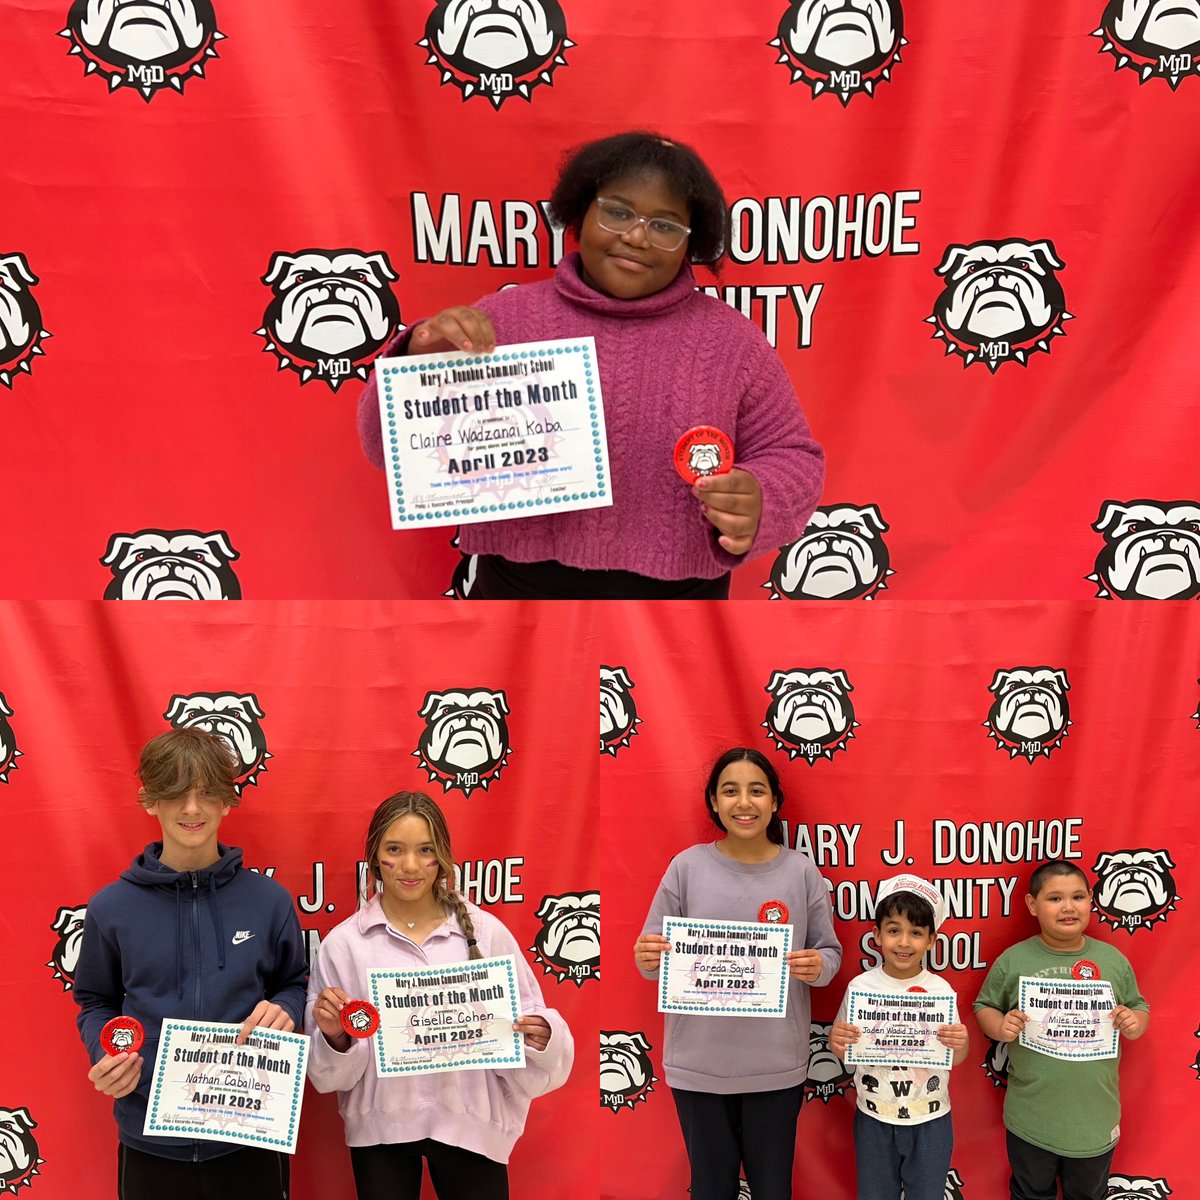 Congratulations to the Student of the Month winners! Keep up the GREAT work! @BayonneBOE